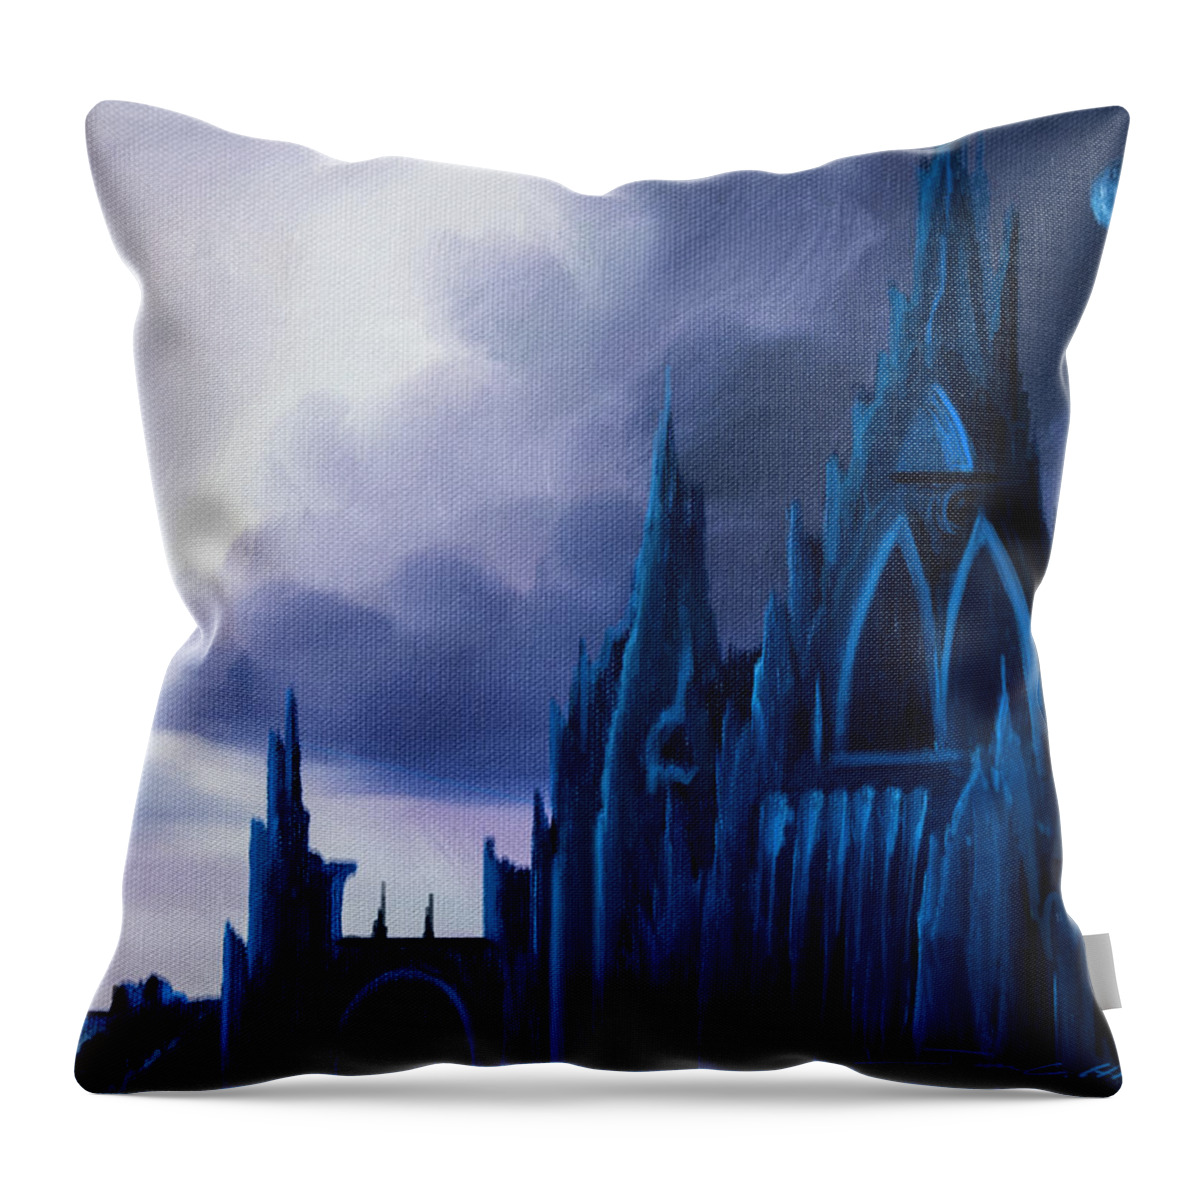 Castle Throw Pillow featuring the painting Dartonian Castle by James Hill